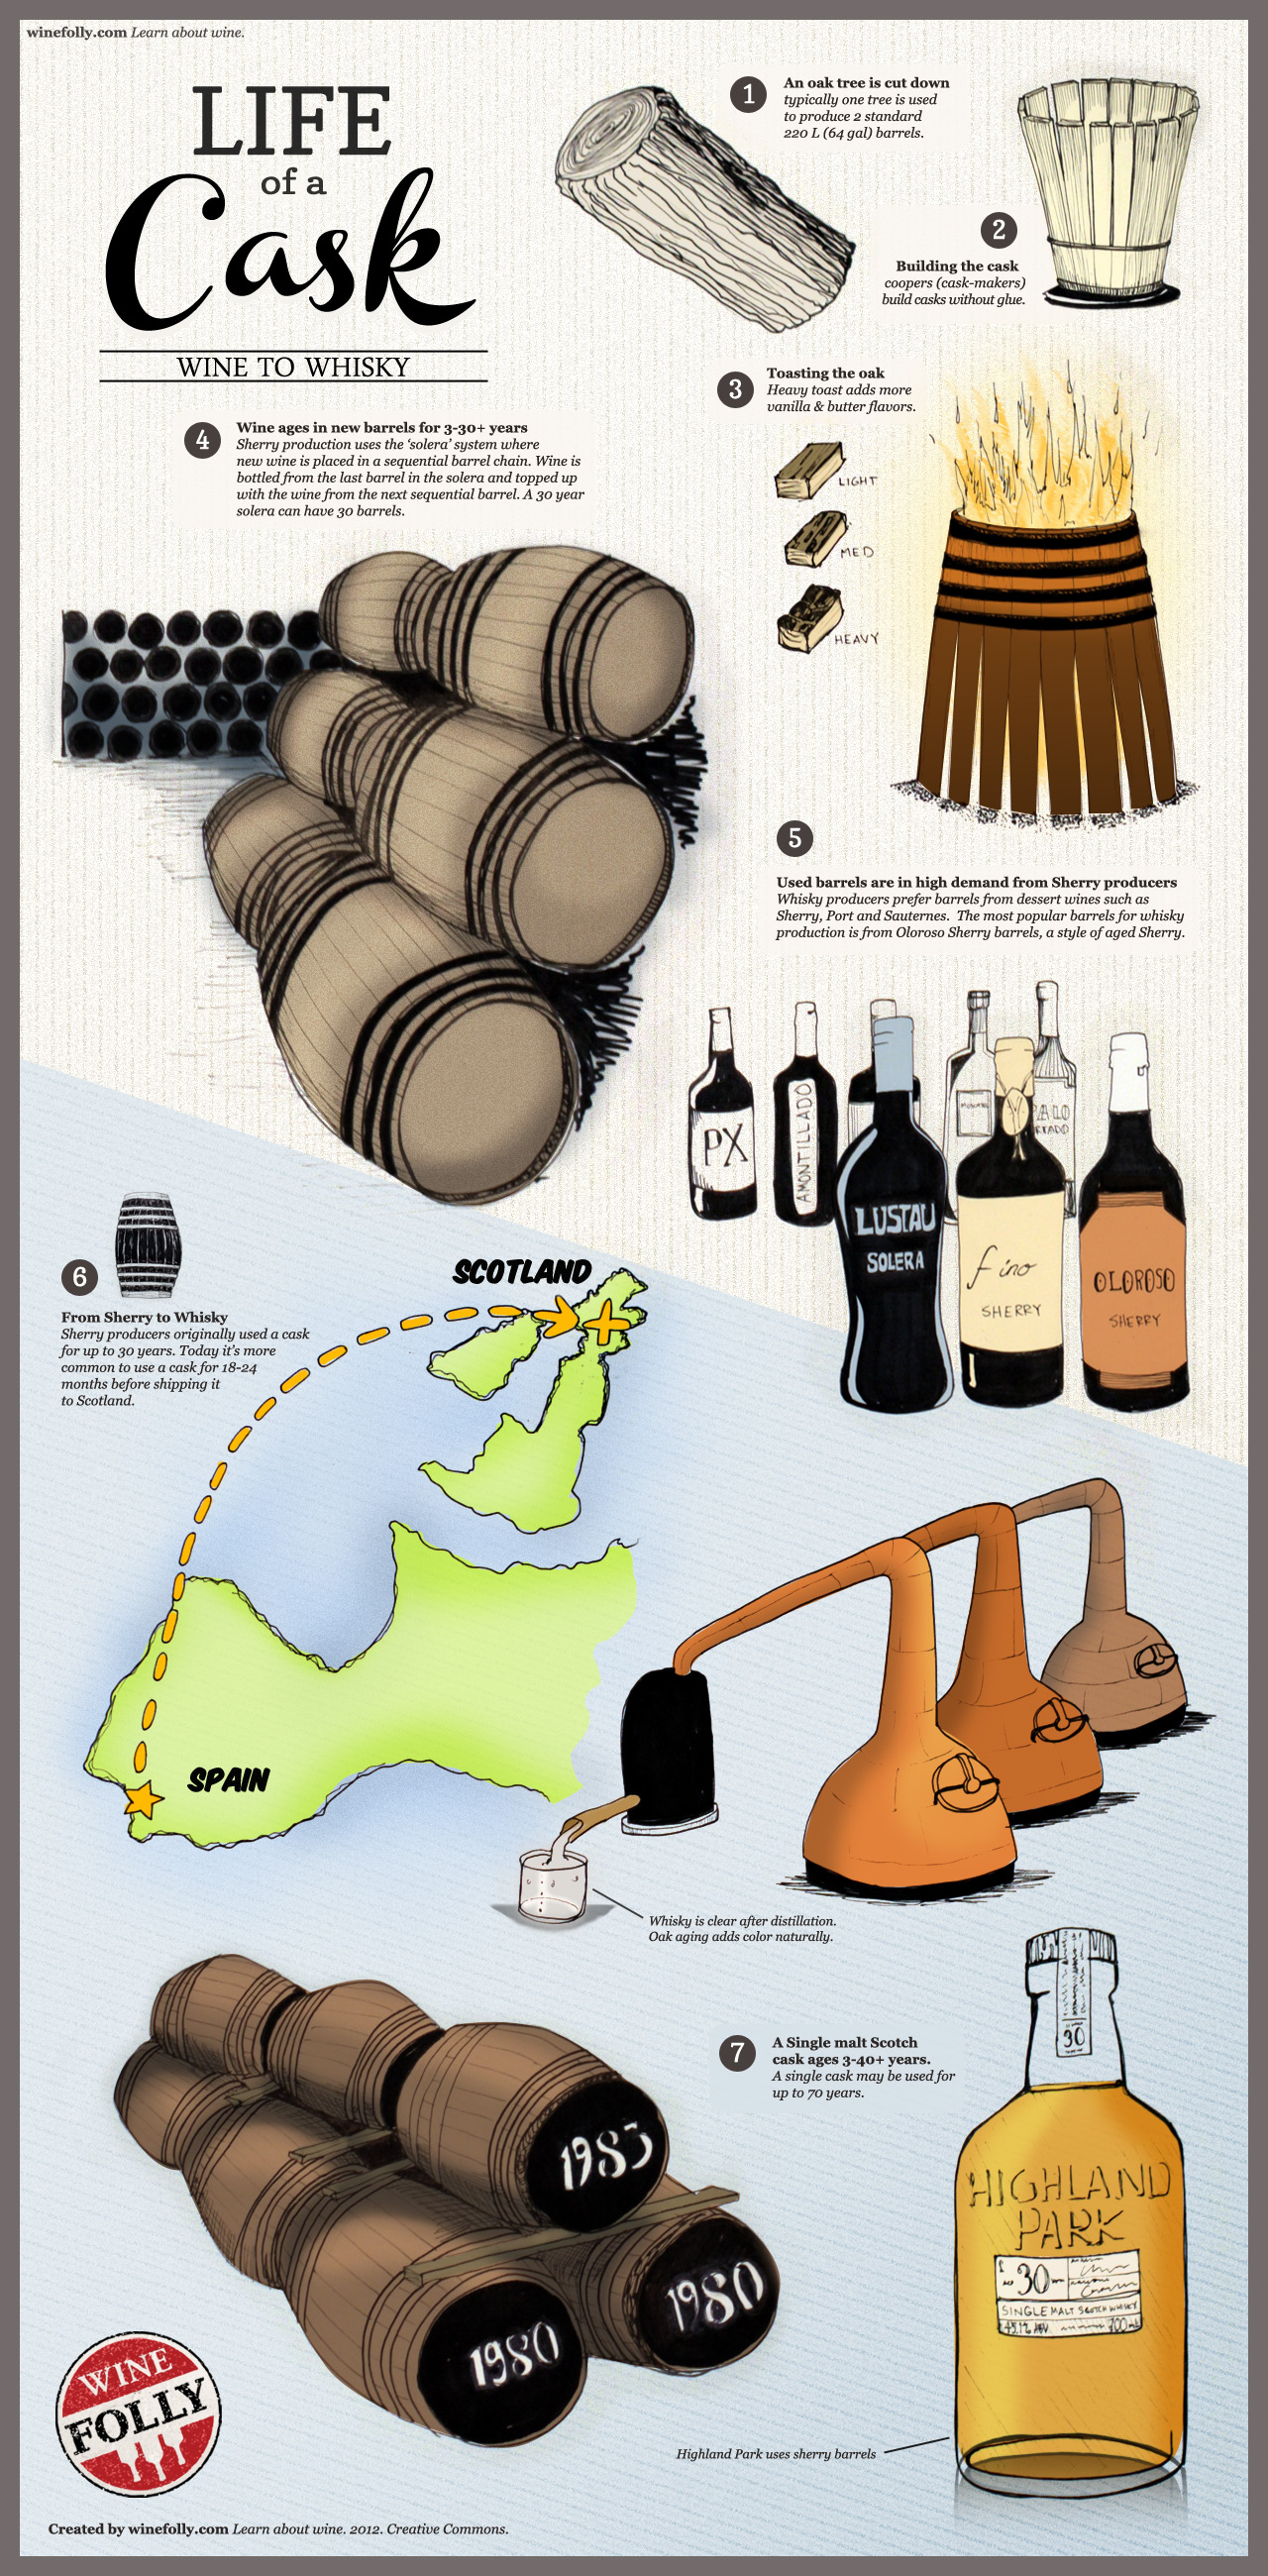 The Life and Times of Whiskey Casks